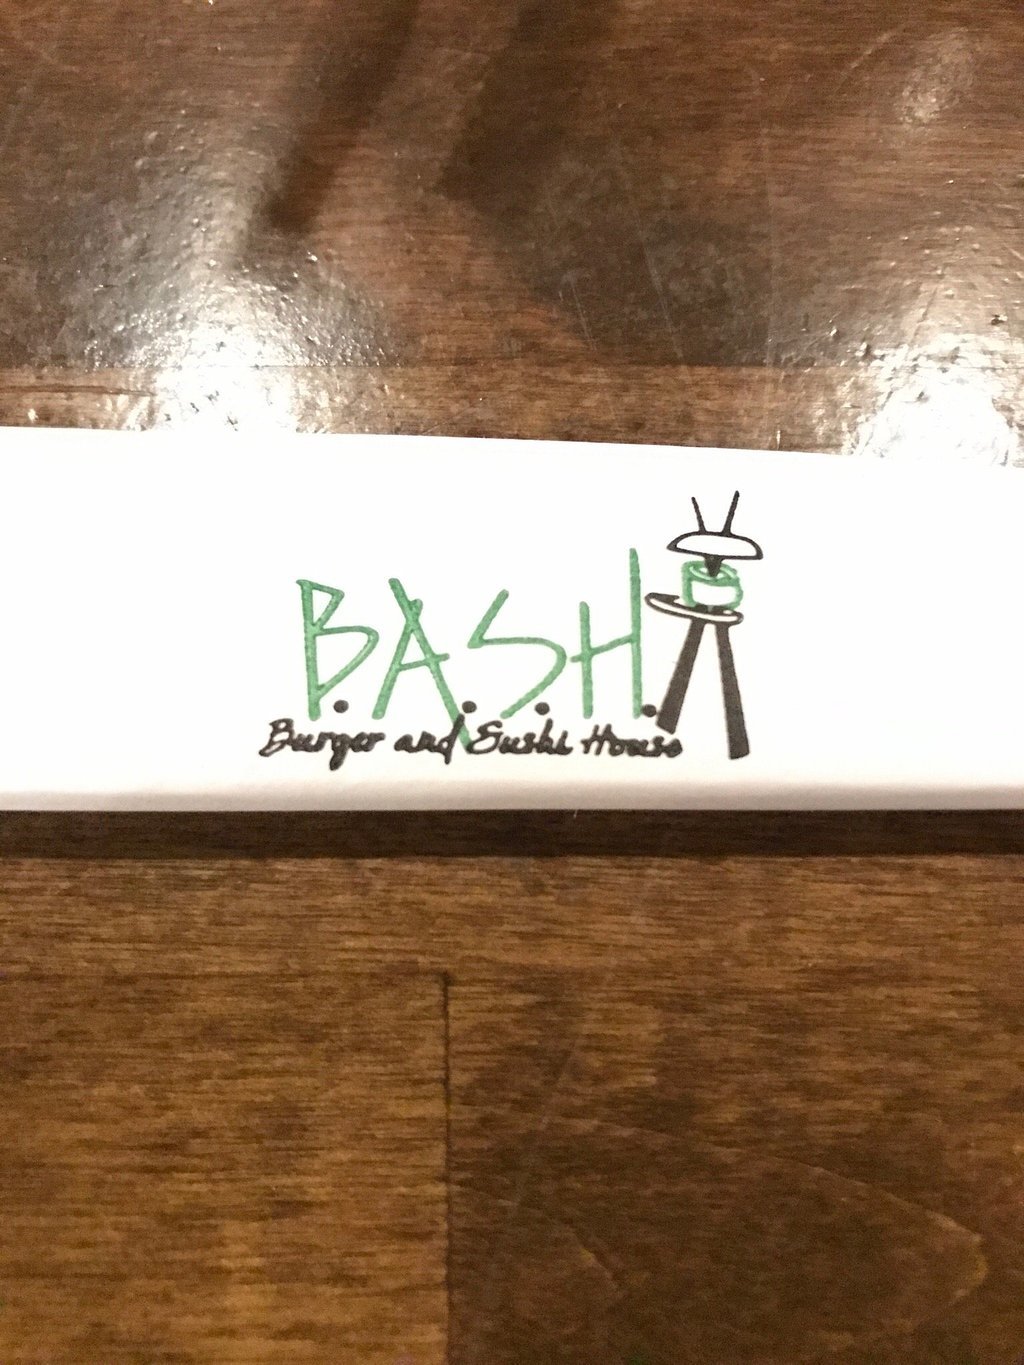 B.A.S.H. Burger and Sushi House